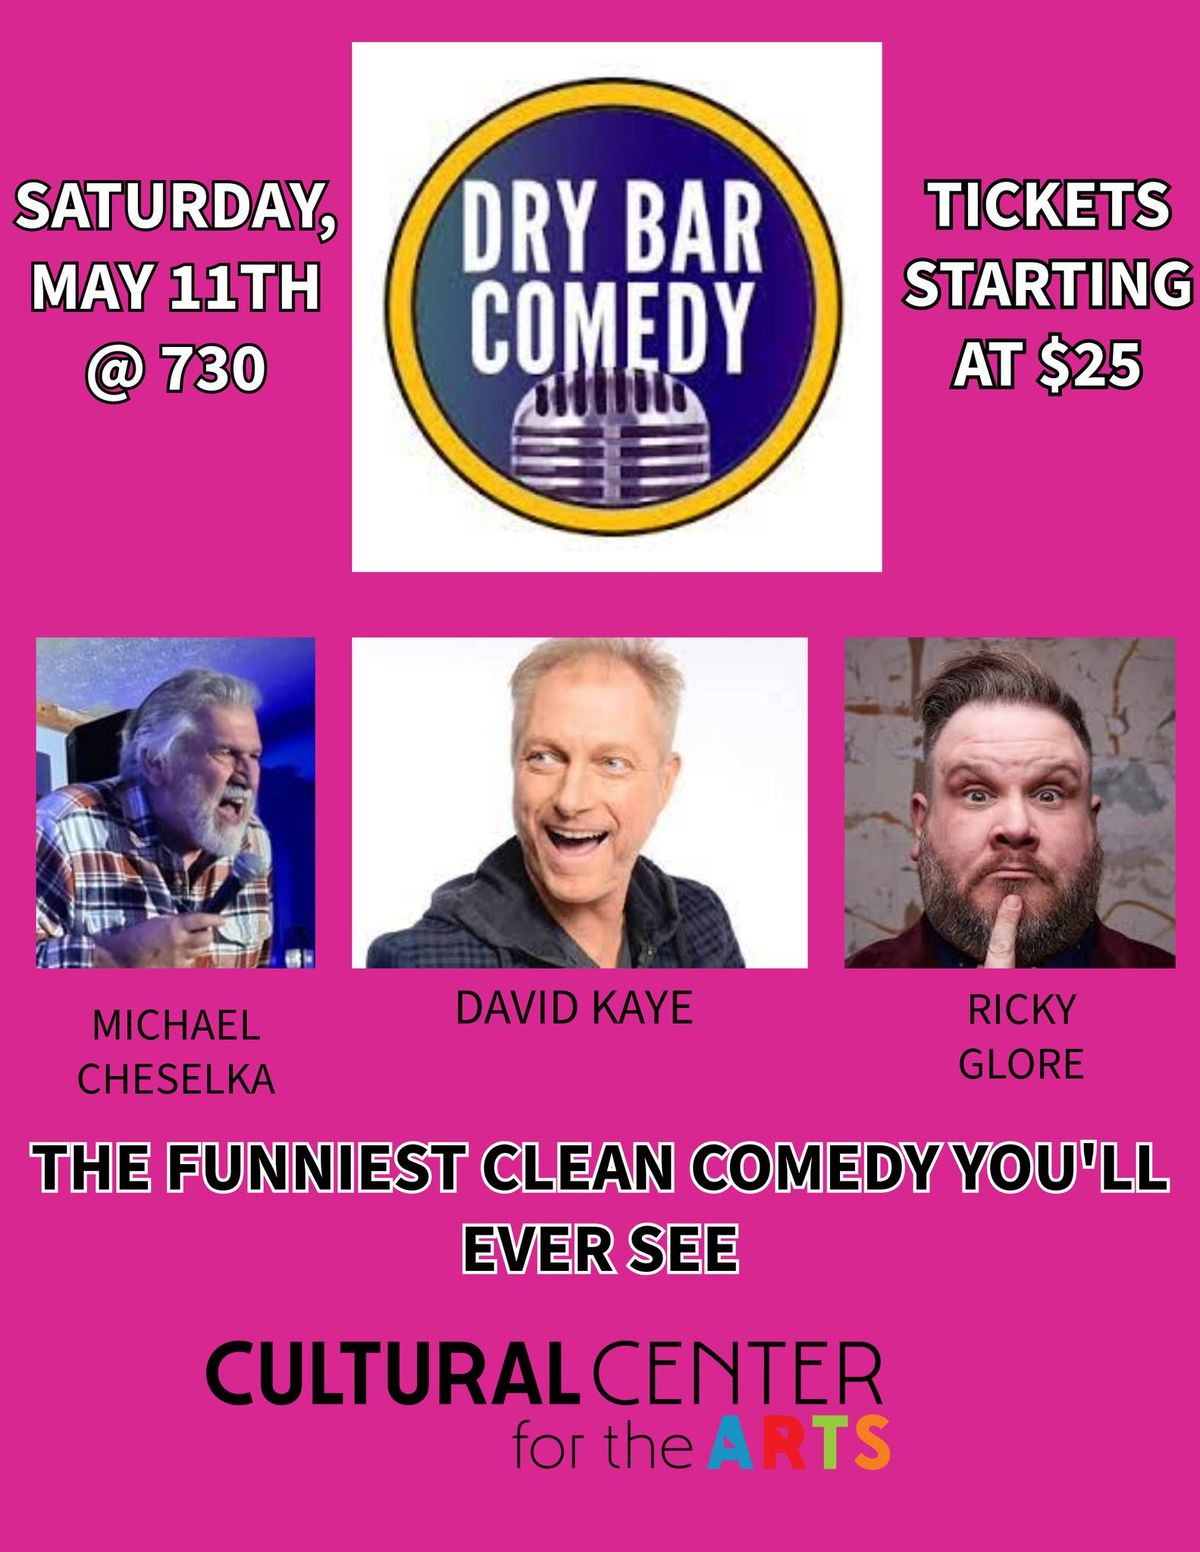 CANTON CULTURAL CENTER FOR THE ARTS PRESENTS DRY BAR COMEDY ROADSHOW